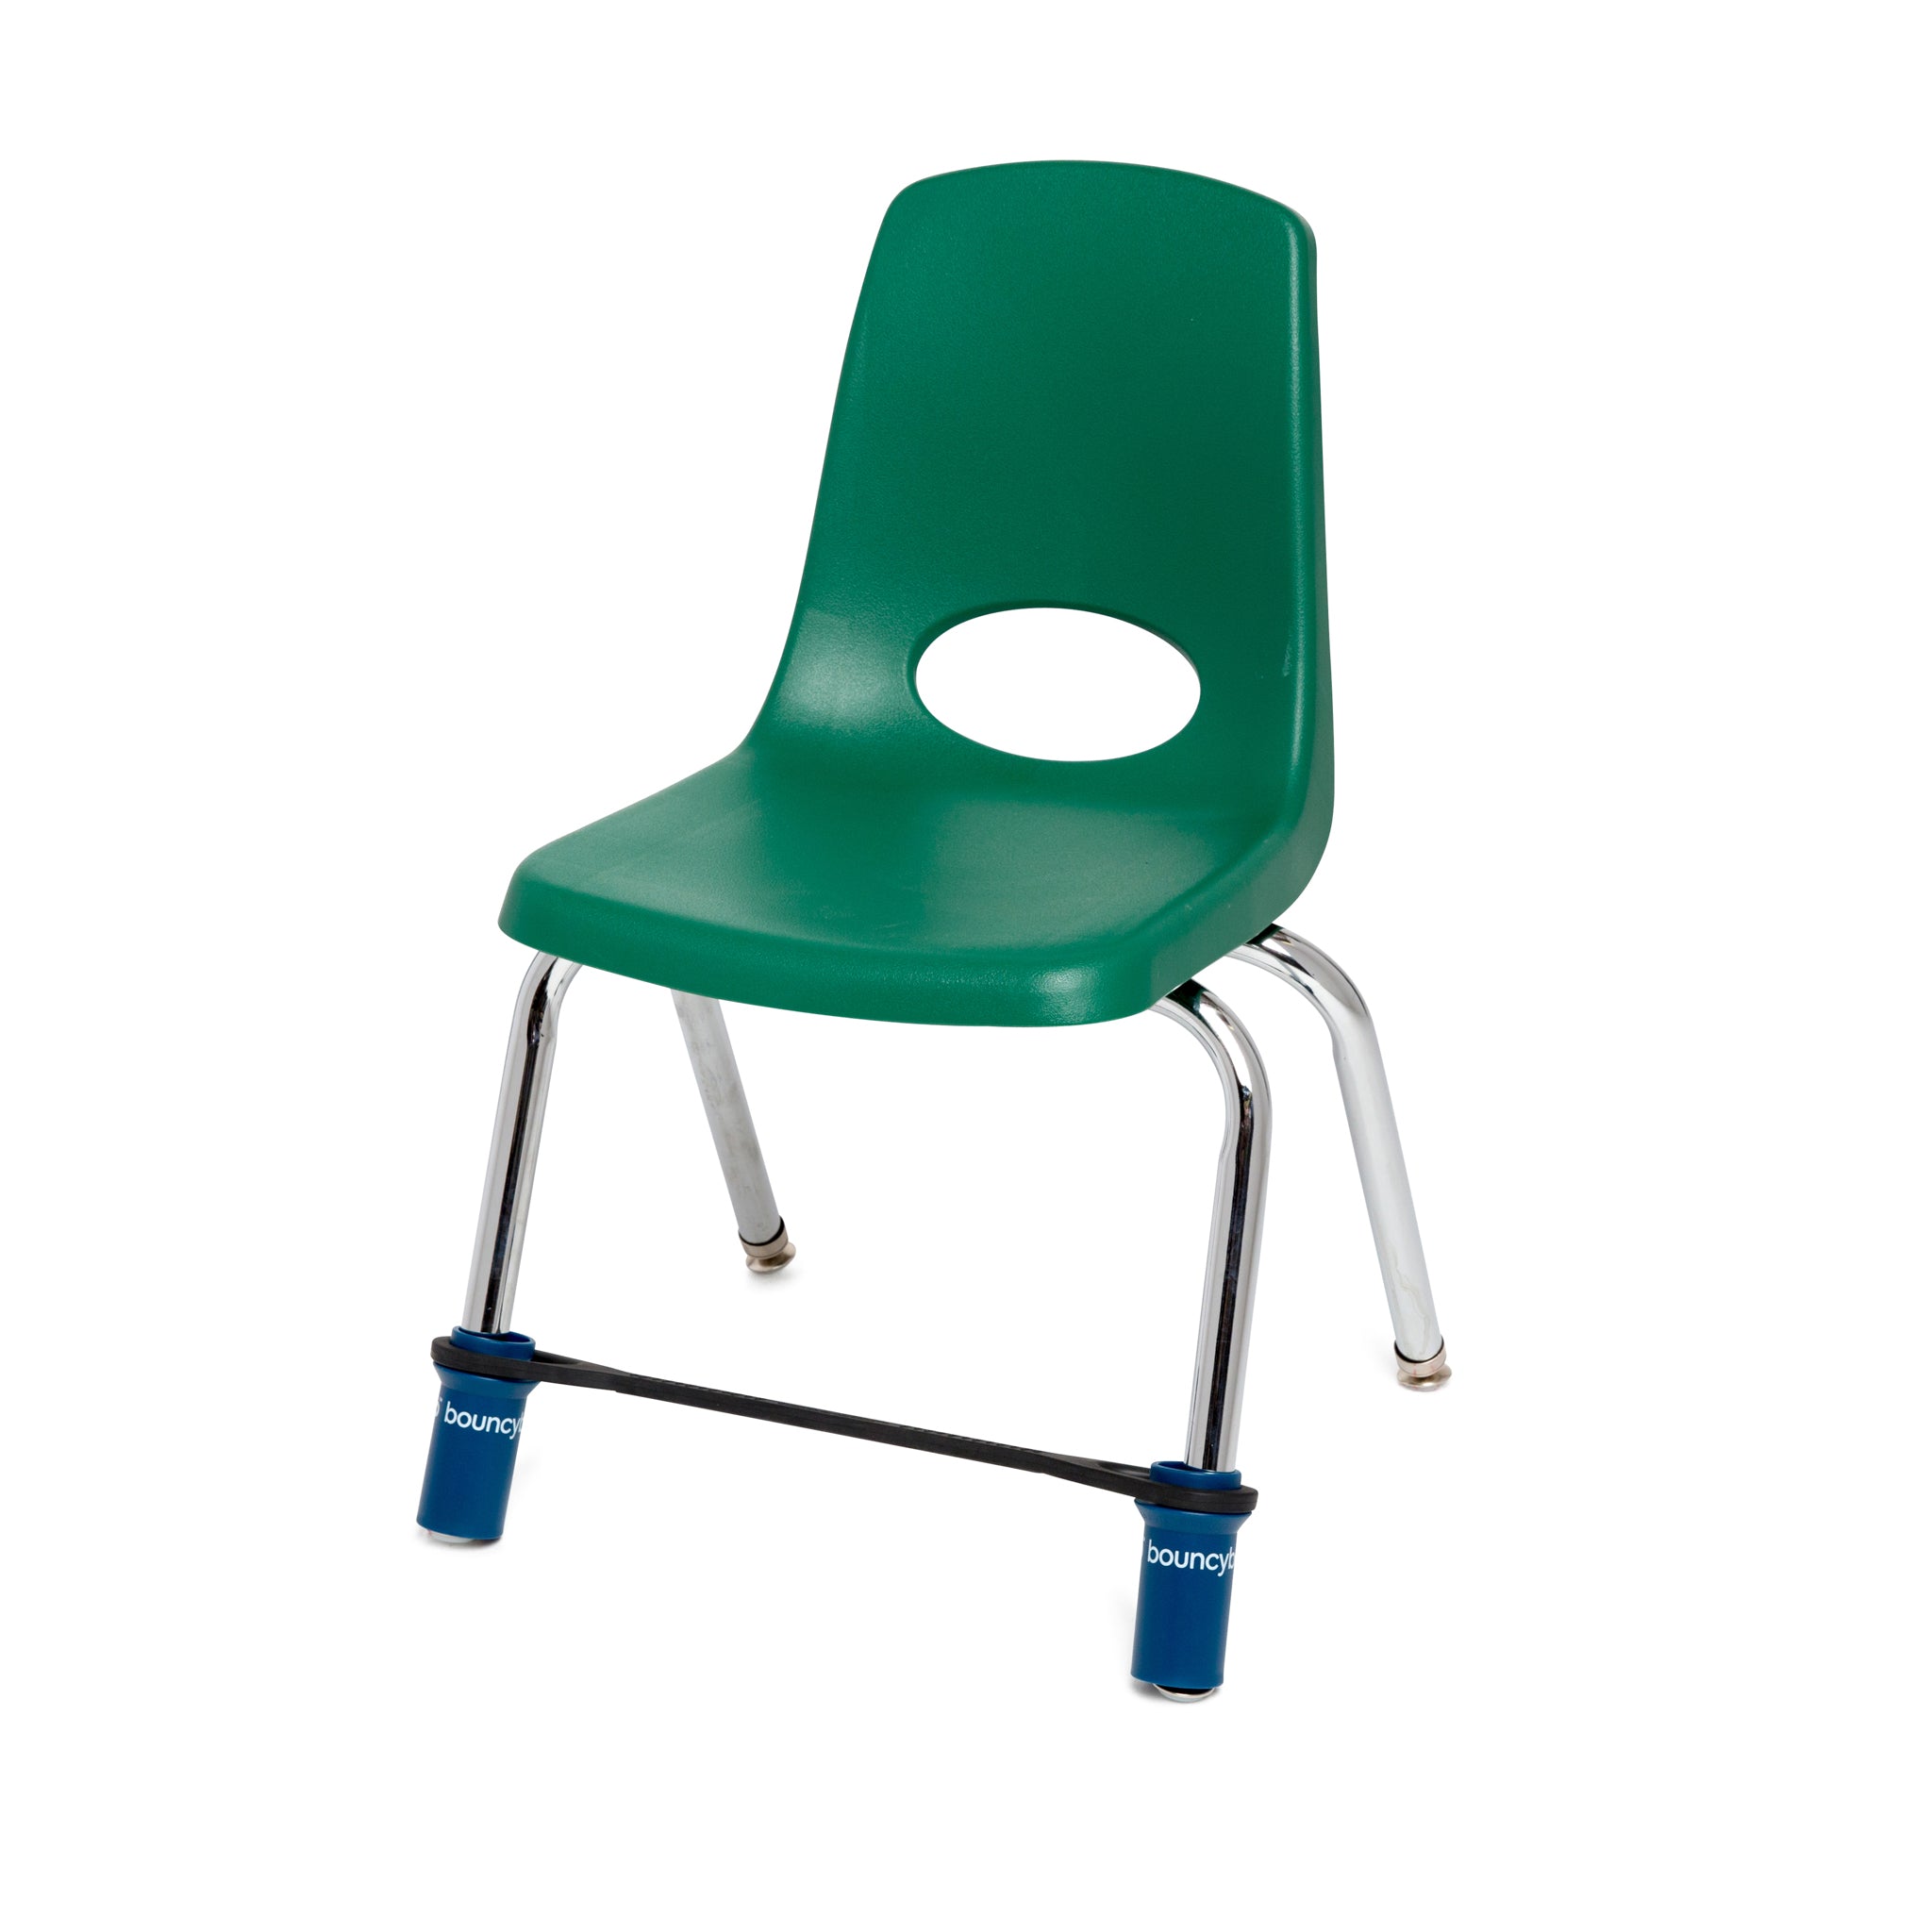 Bouncyband For Elementary School Chairs Blue Stages Learning